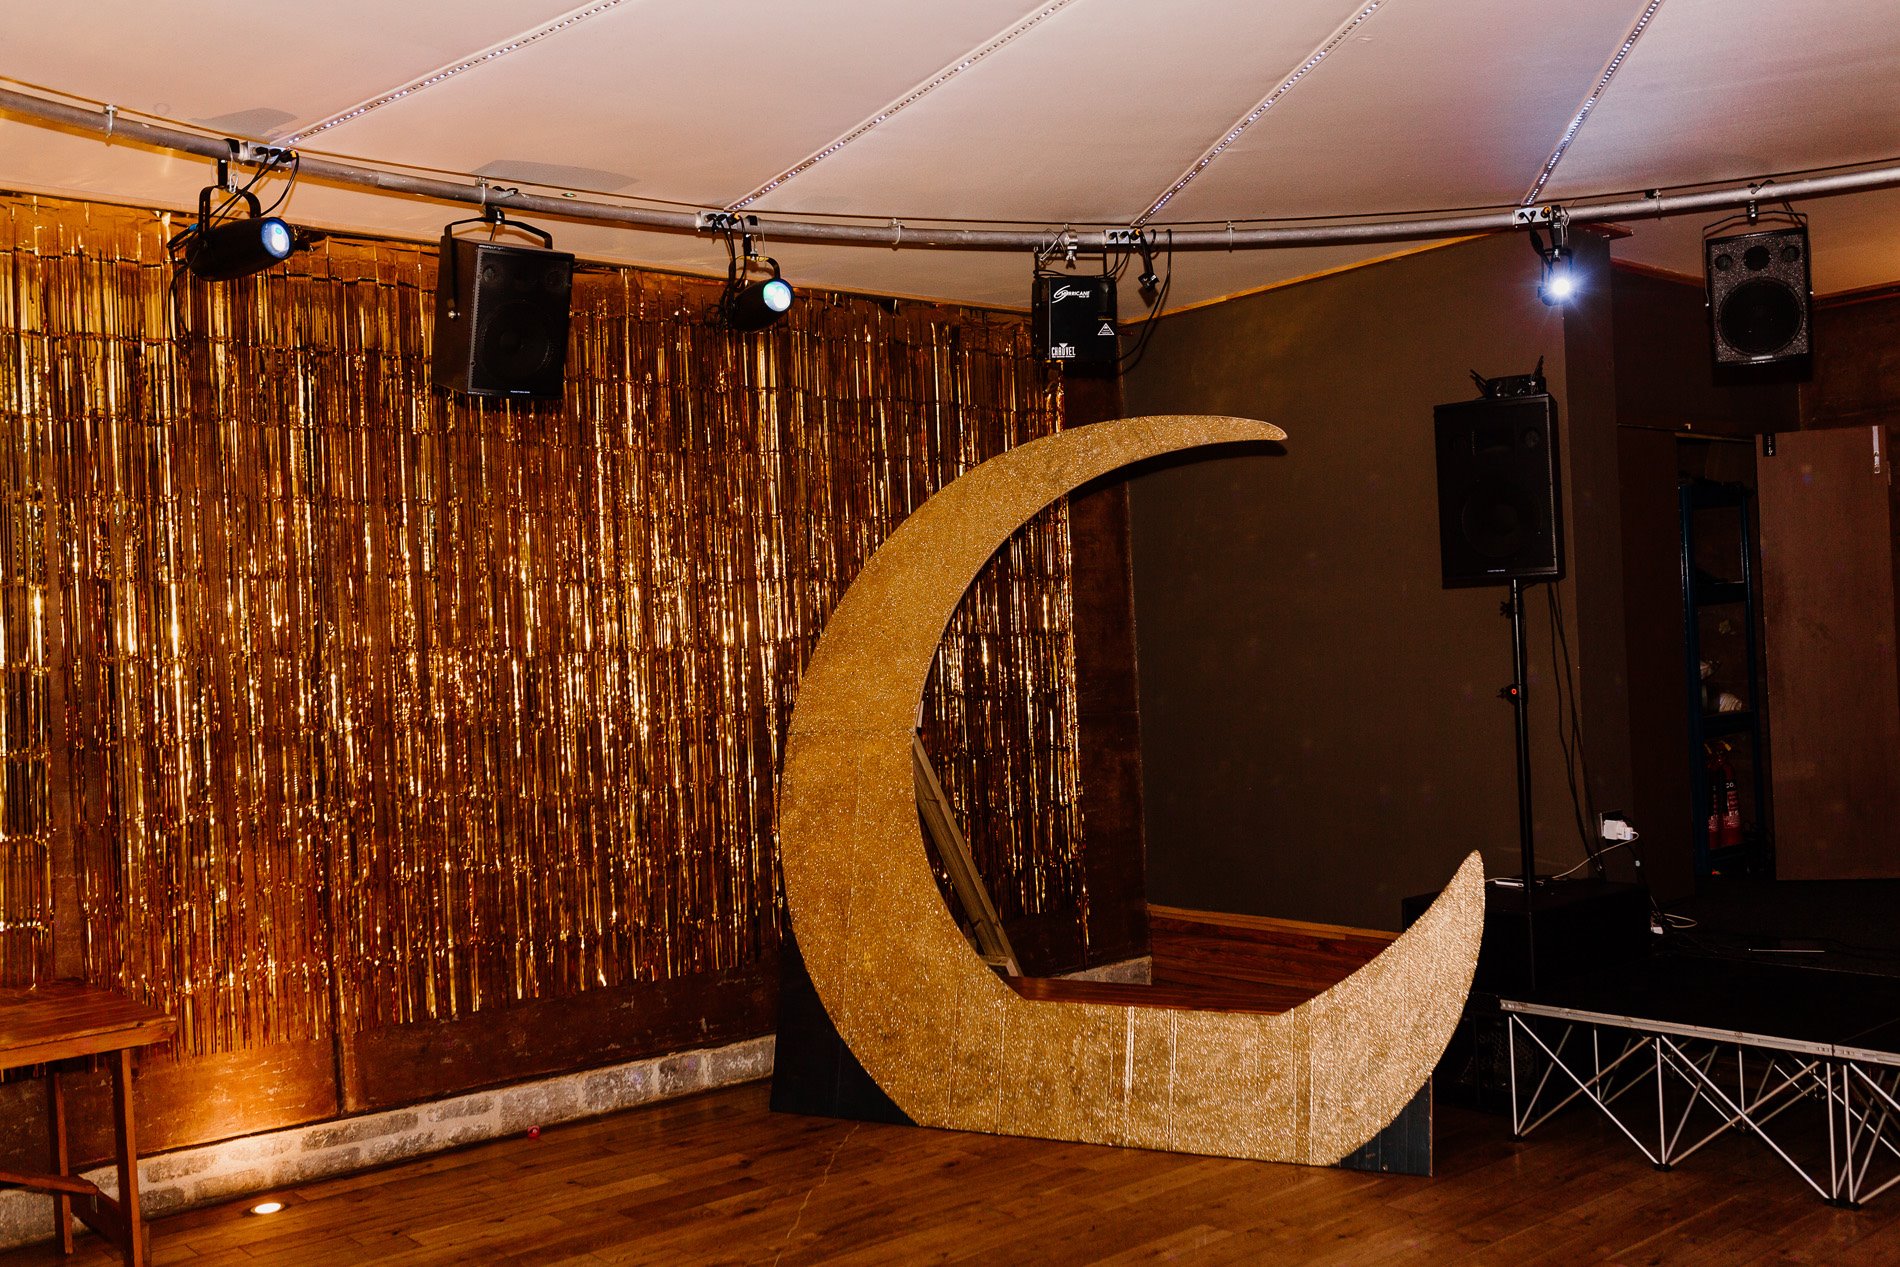 Giant gold moon and gold curtain for celestial wedding at stately home elmore court